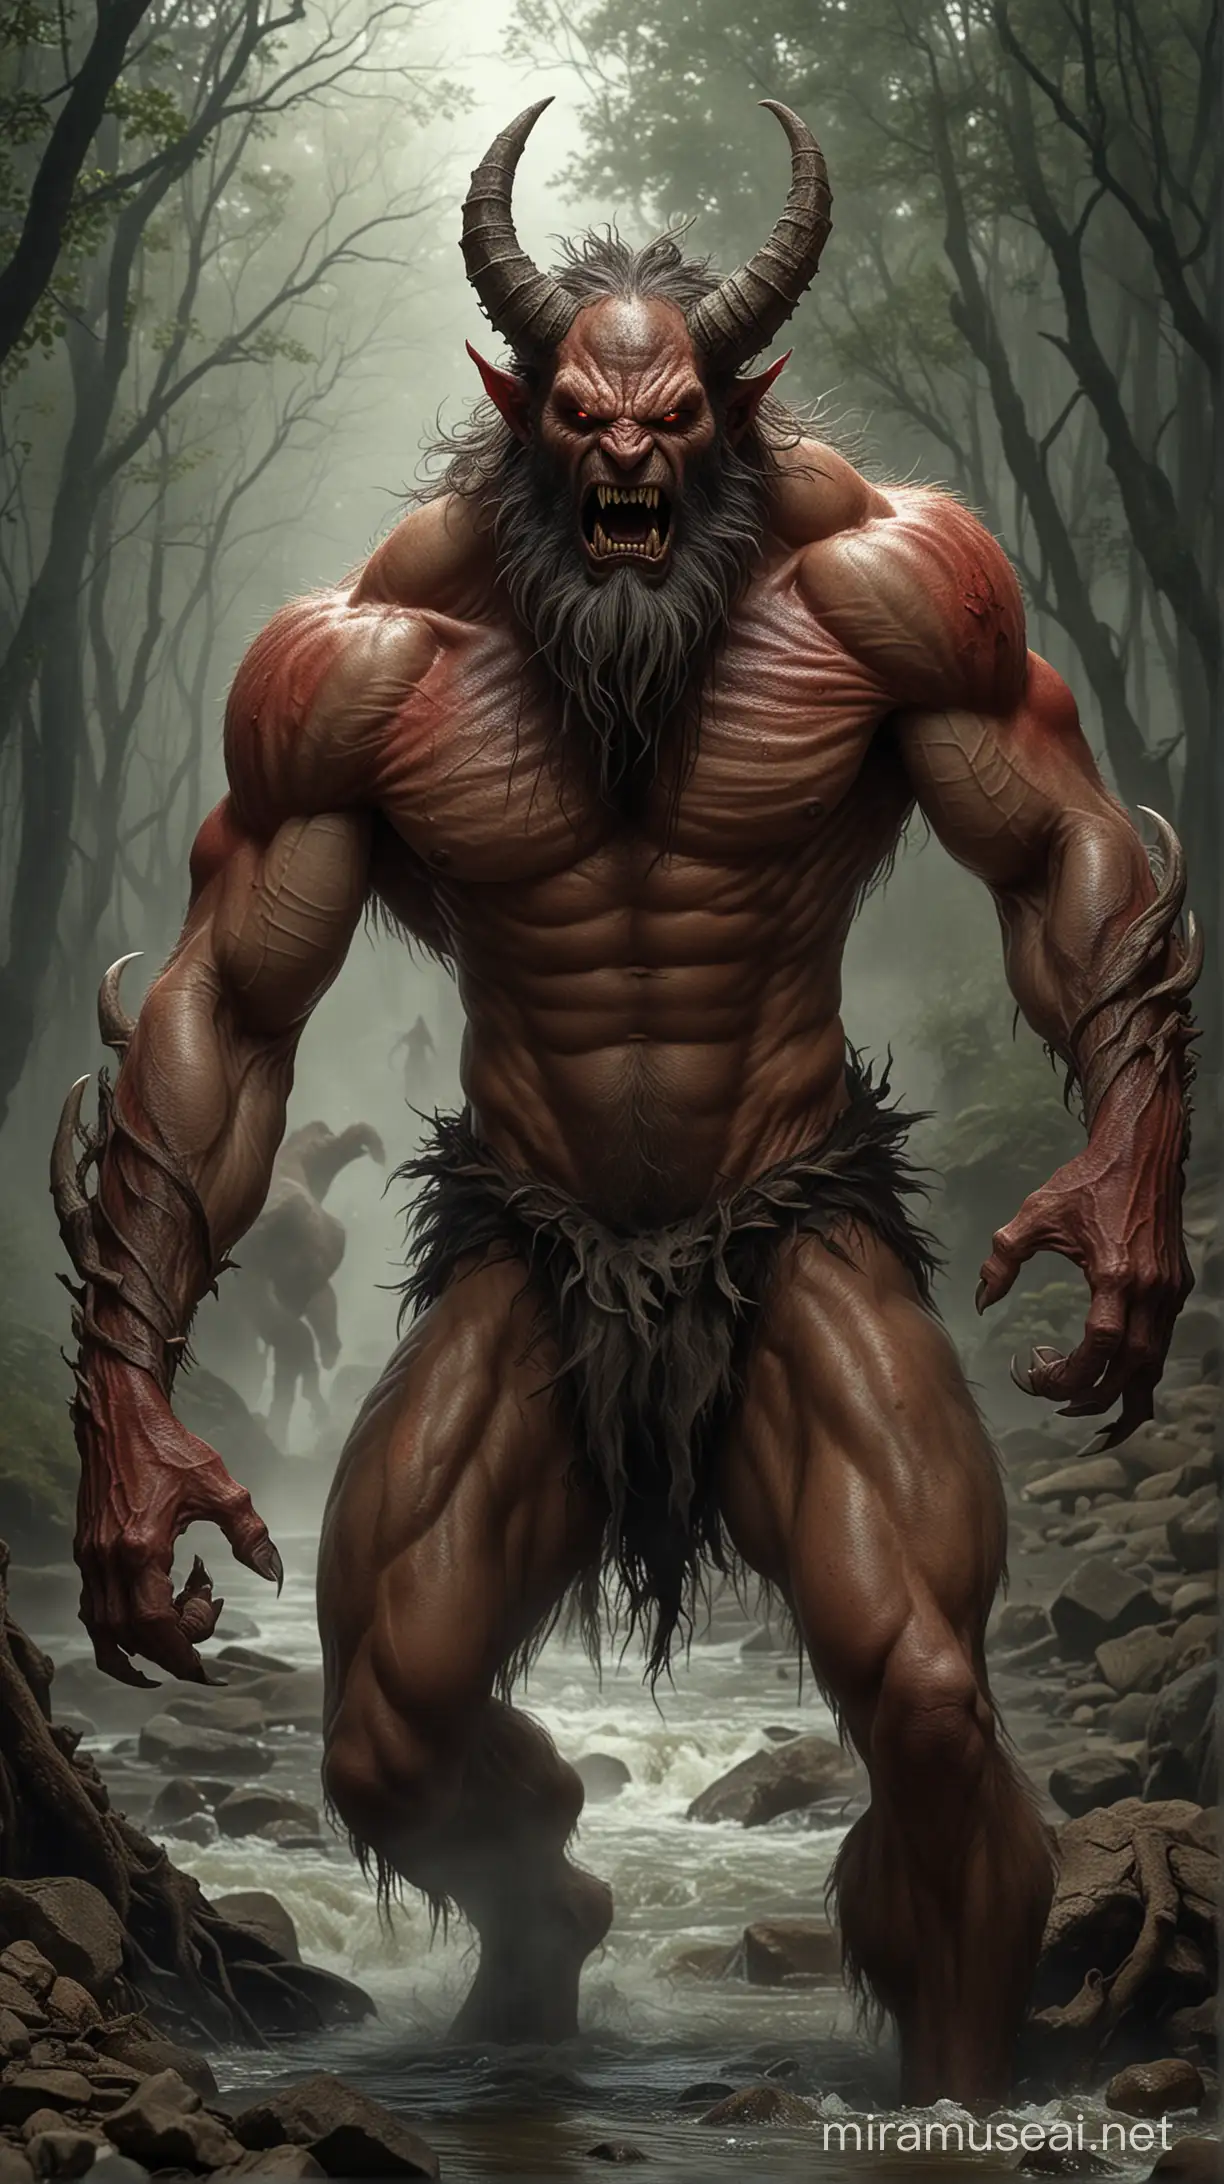 Muscle Man Battles Monster with Glowing Eyes by the Riverbank